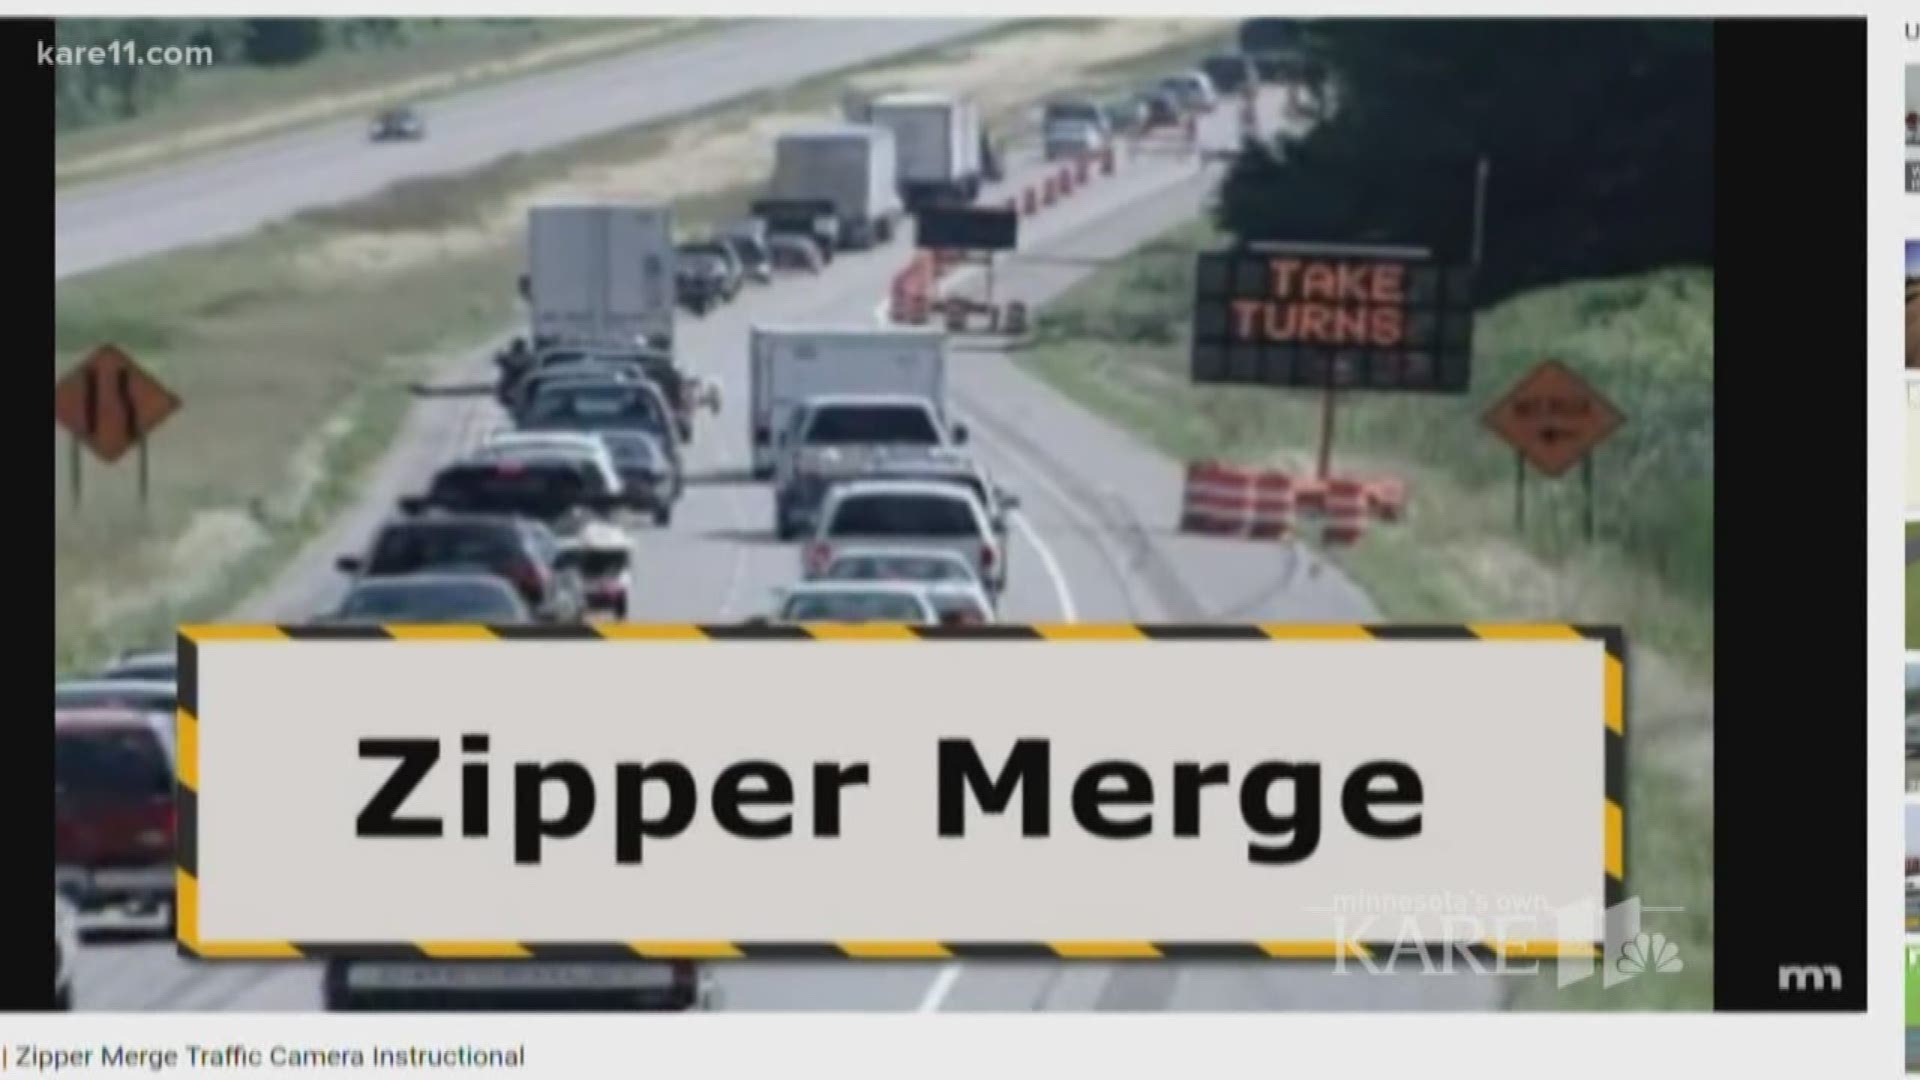 Few things can raise the blood pressure of Minnesota drivers like debating the so-called 'zipper merge.' But are we actually supposed to do it?